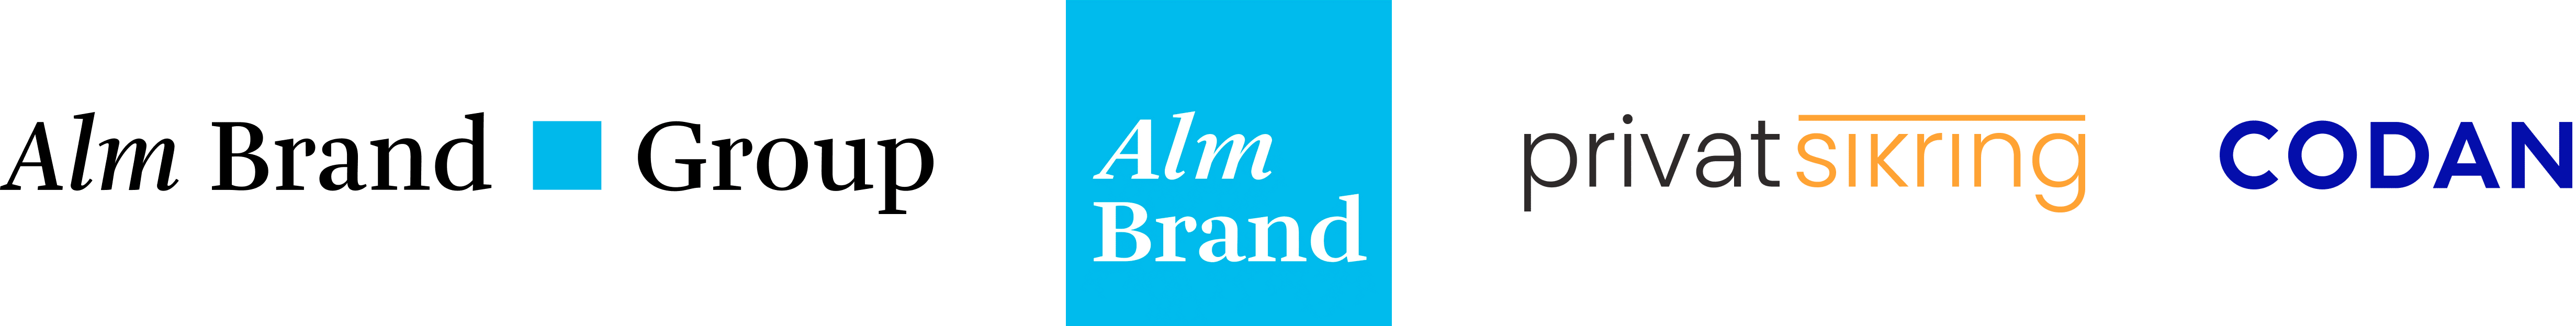 Alm brand group, Privat sikring , codan